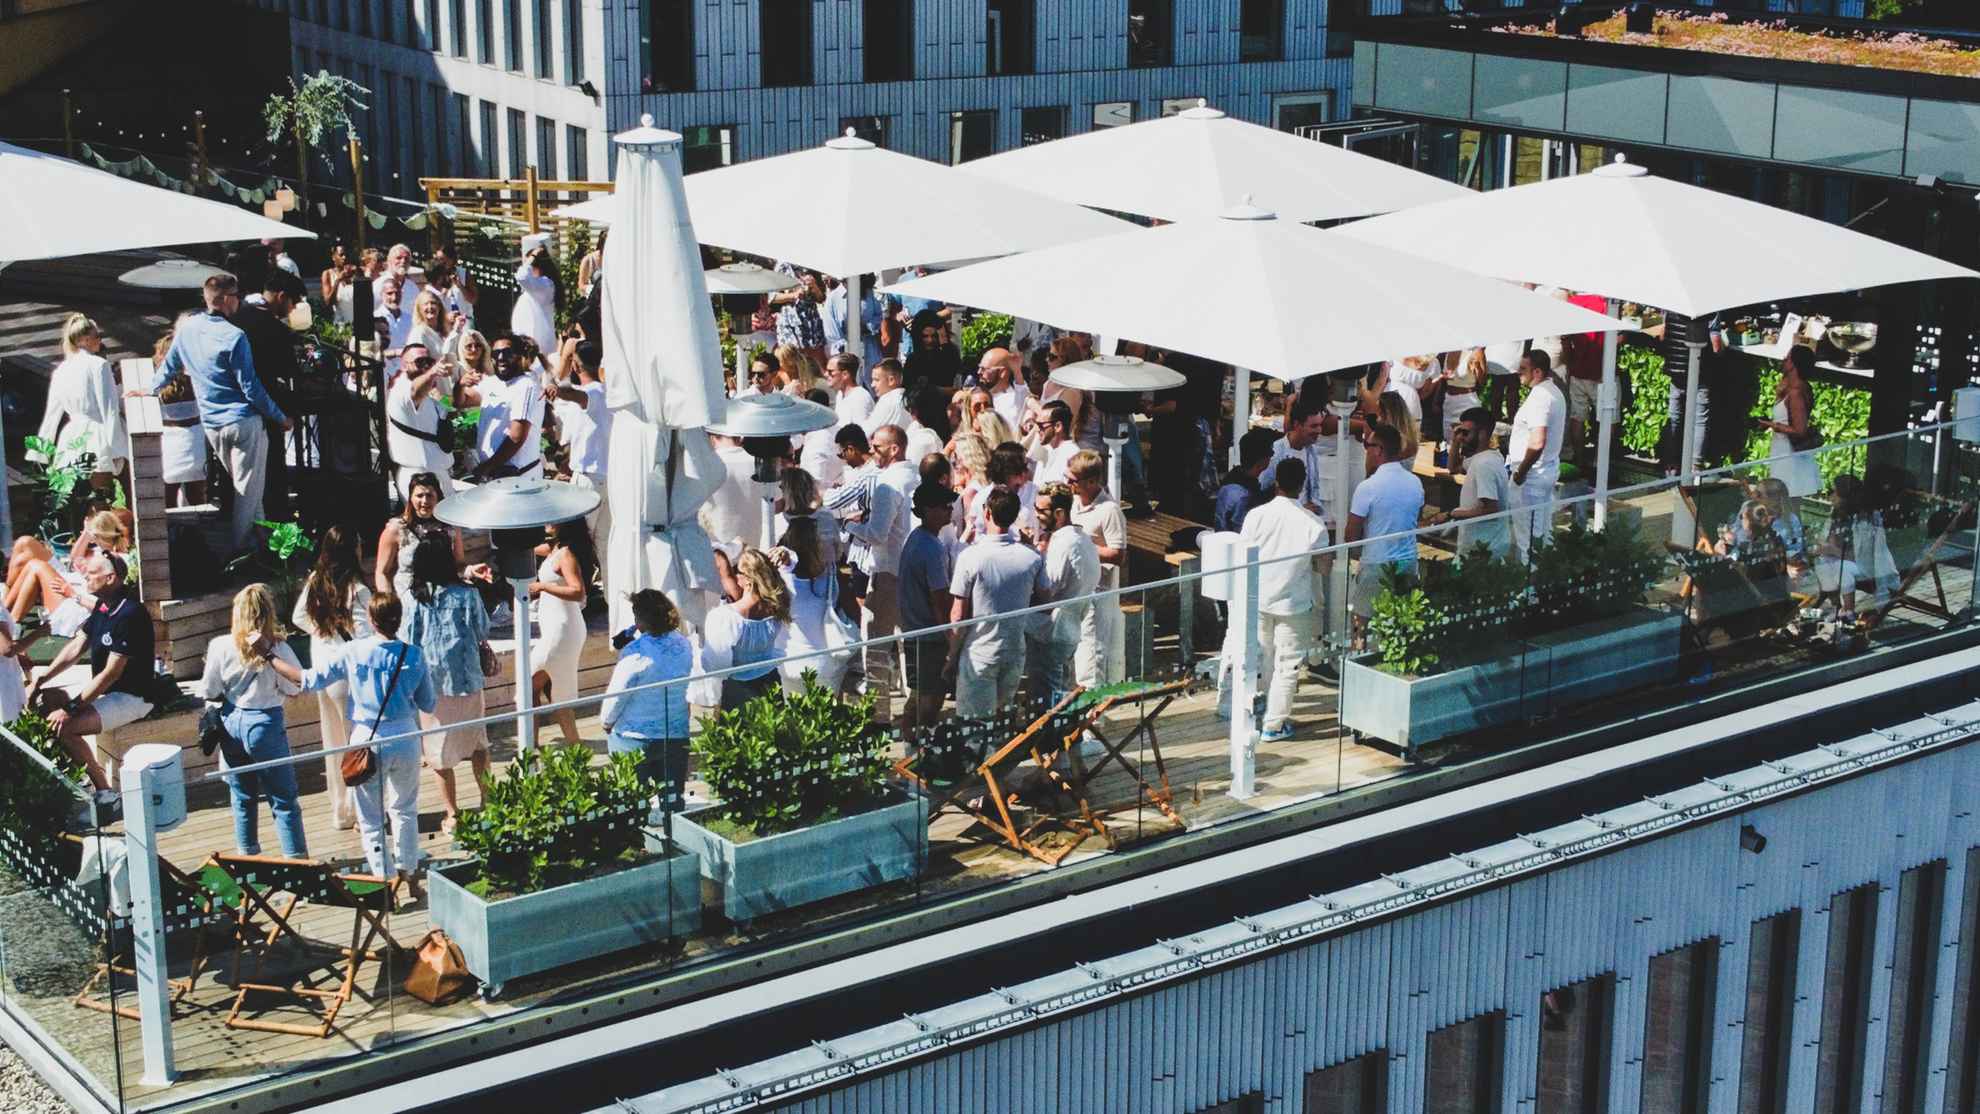 People drinking cocktails on a rooftop bar.